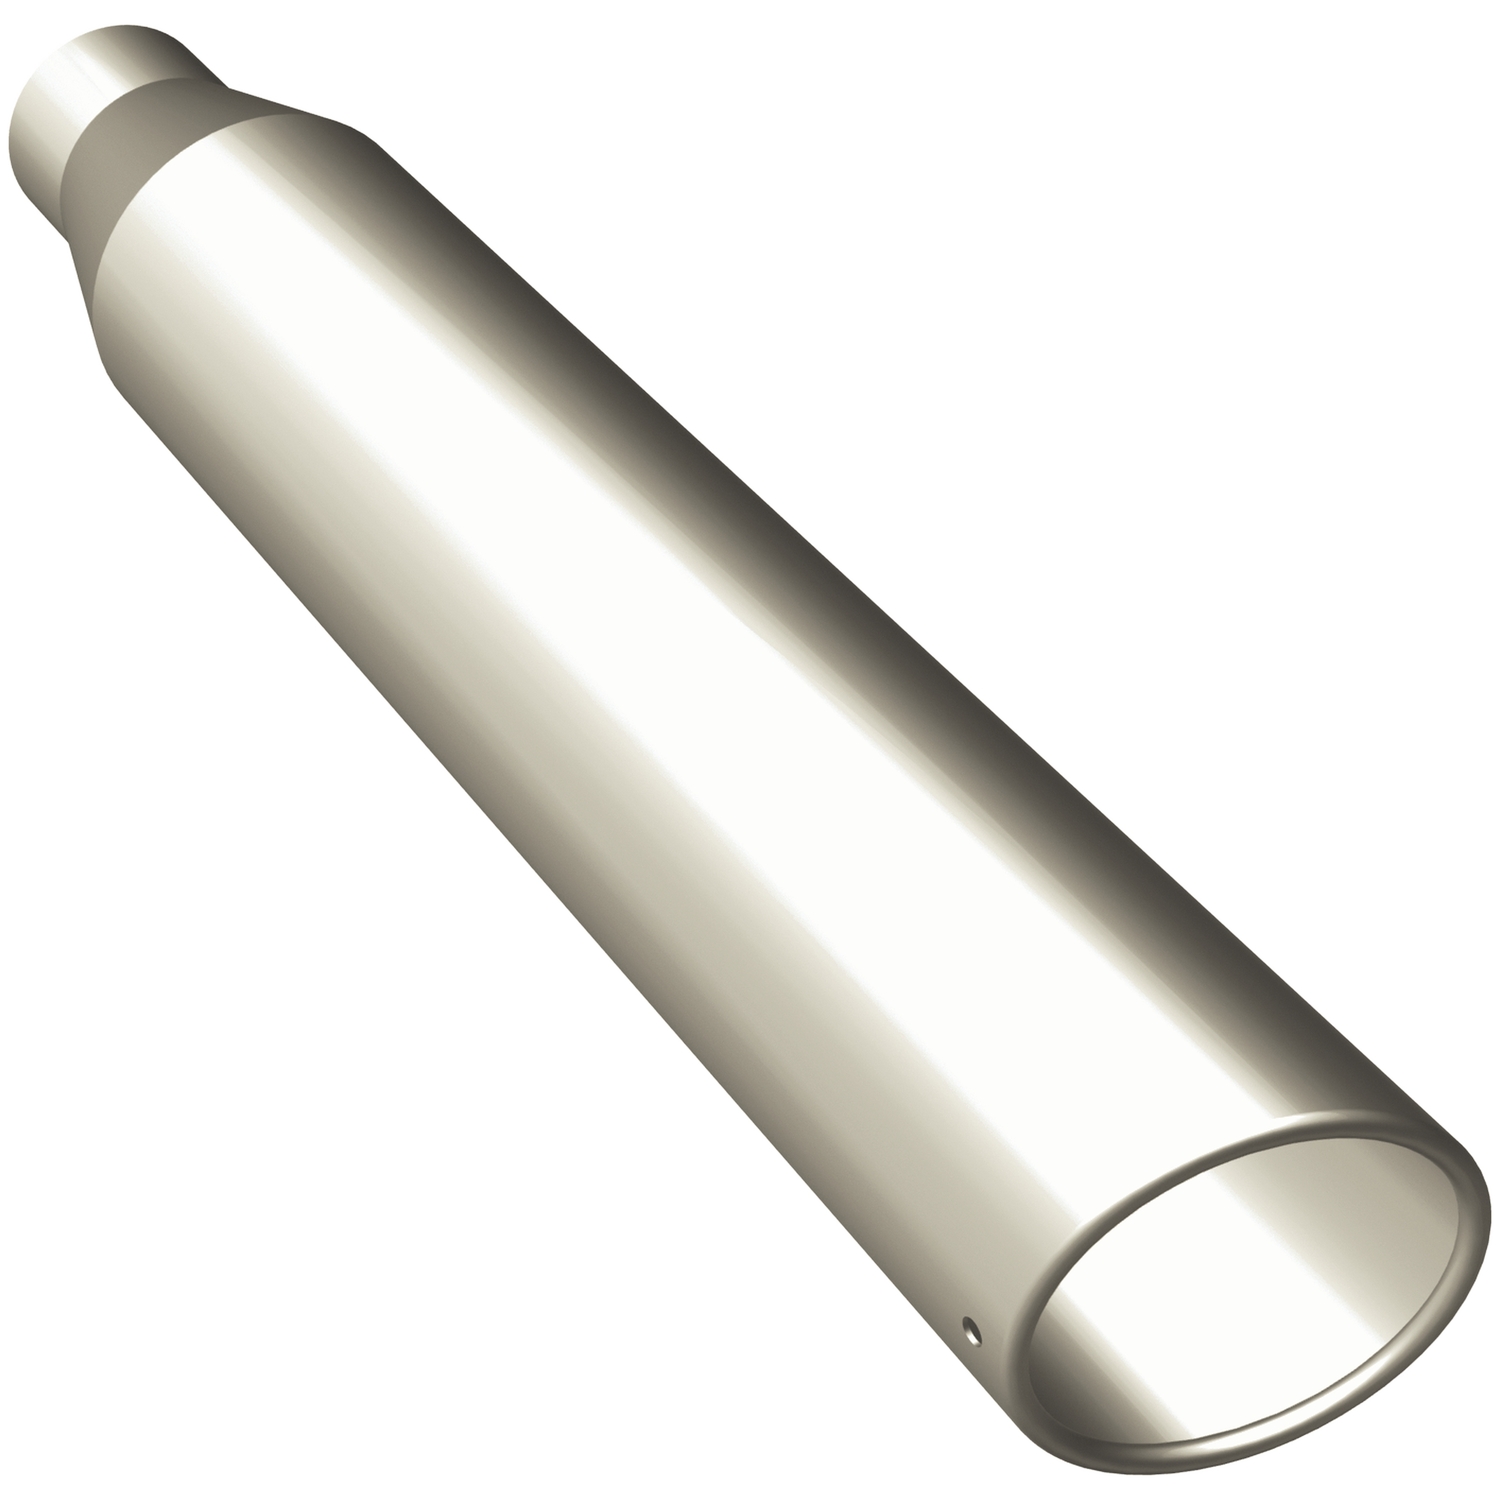 Polished Stainless Steel Weld-On Single Exhaust Tip Inlet Inside Diameter: 2.5"